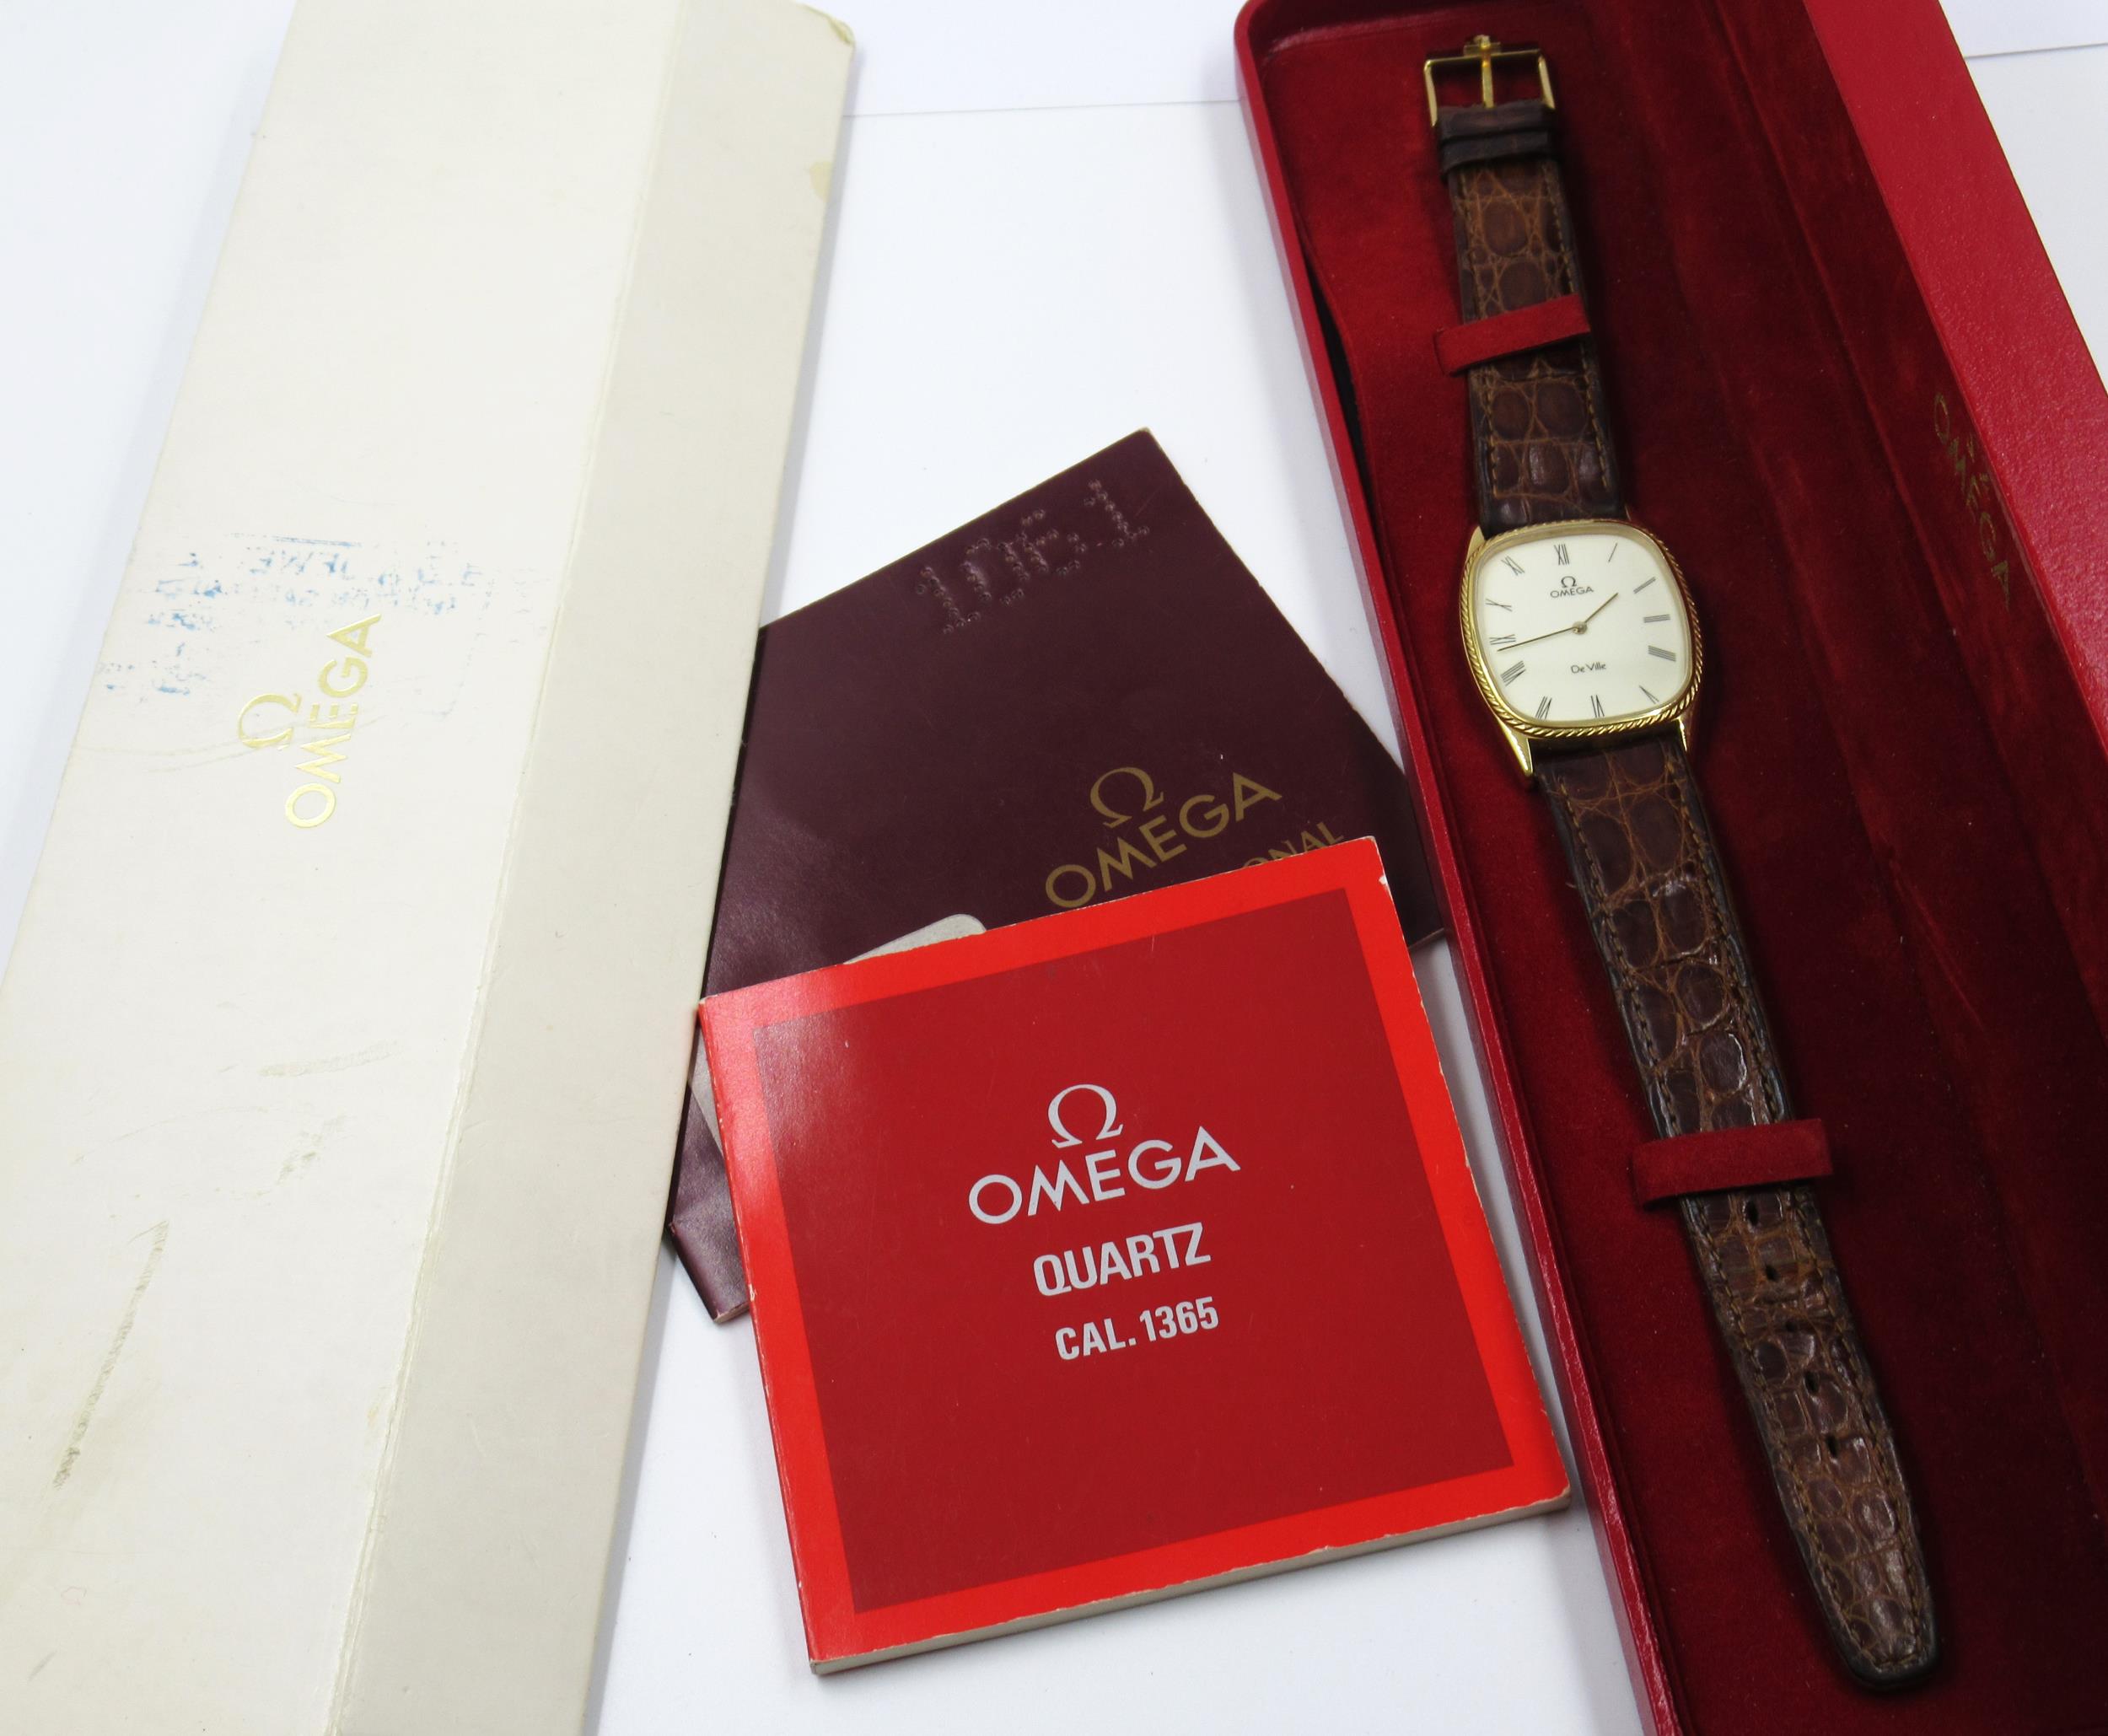 Omega De Ville ladies gold plated quartz wristwatch with brown leather strap, in original box with